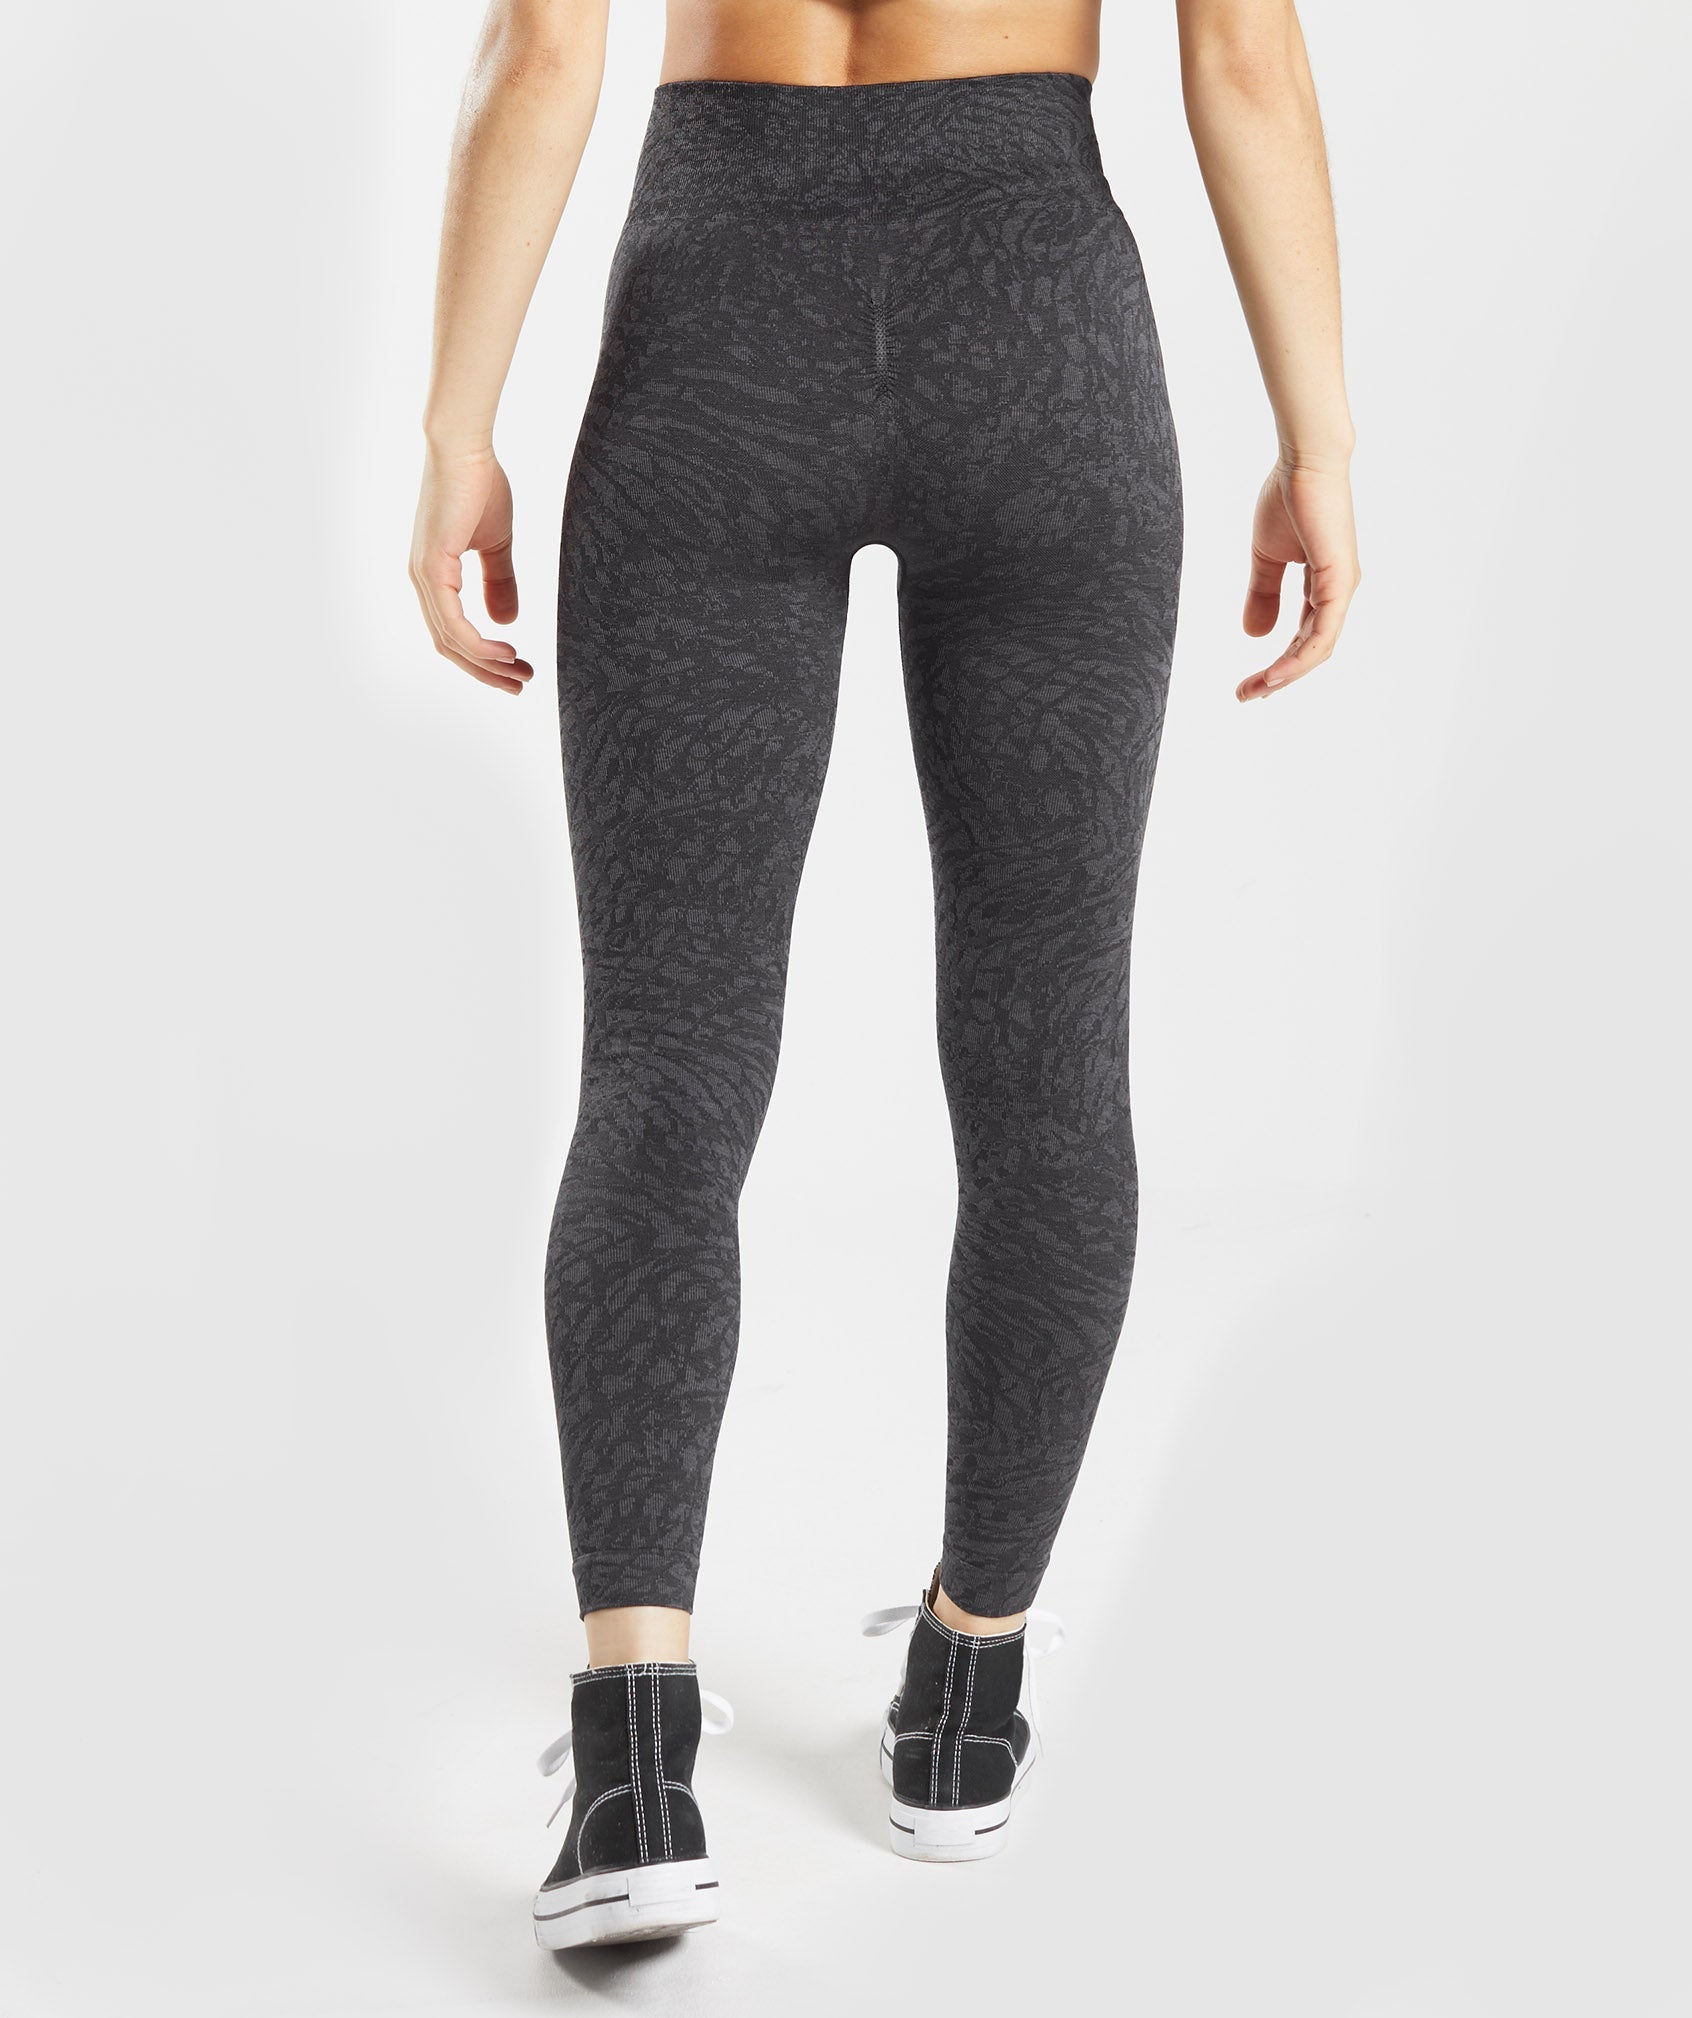 Adapt Animal Seamless Leggings Review  International Society of Precision  Agriculture